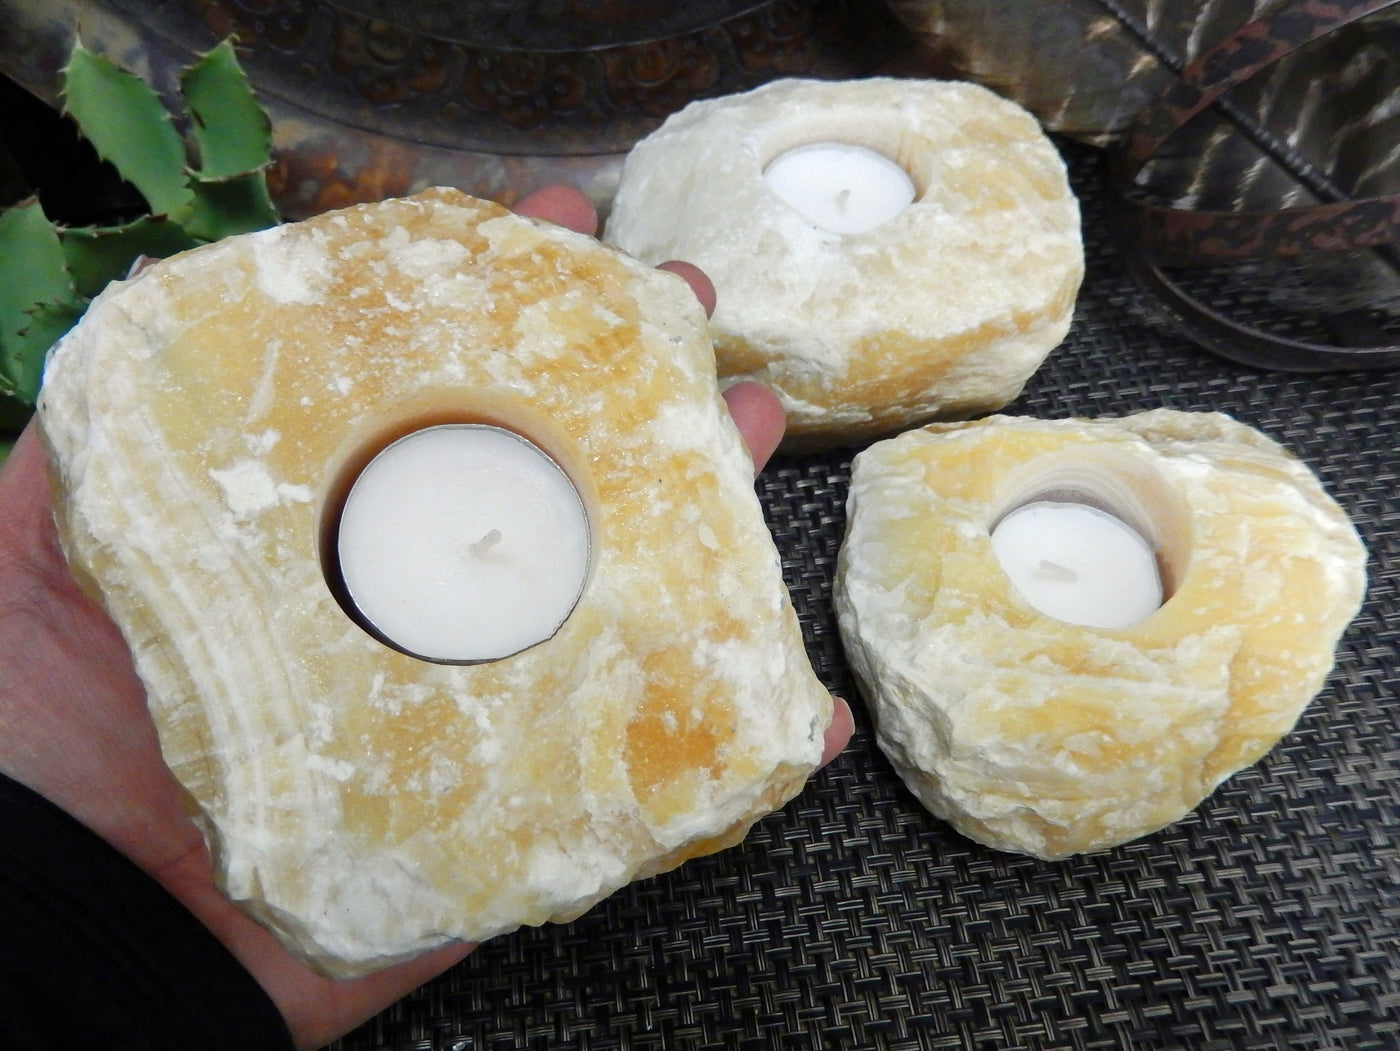 Mexican Orange Calcite Candle Holders with one in a hand for size reference